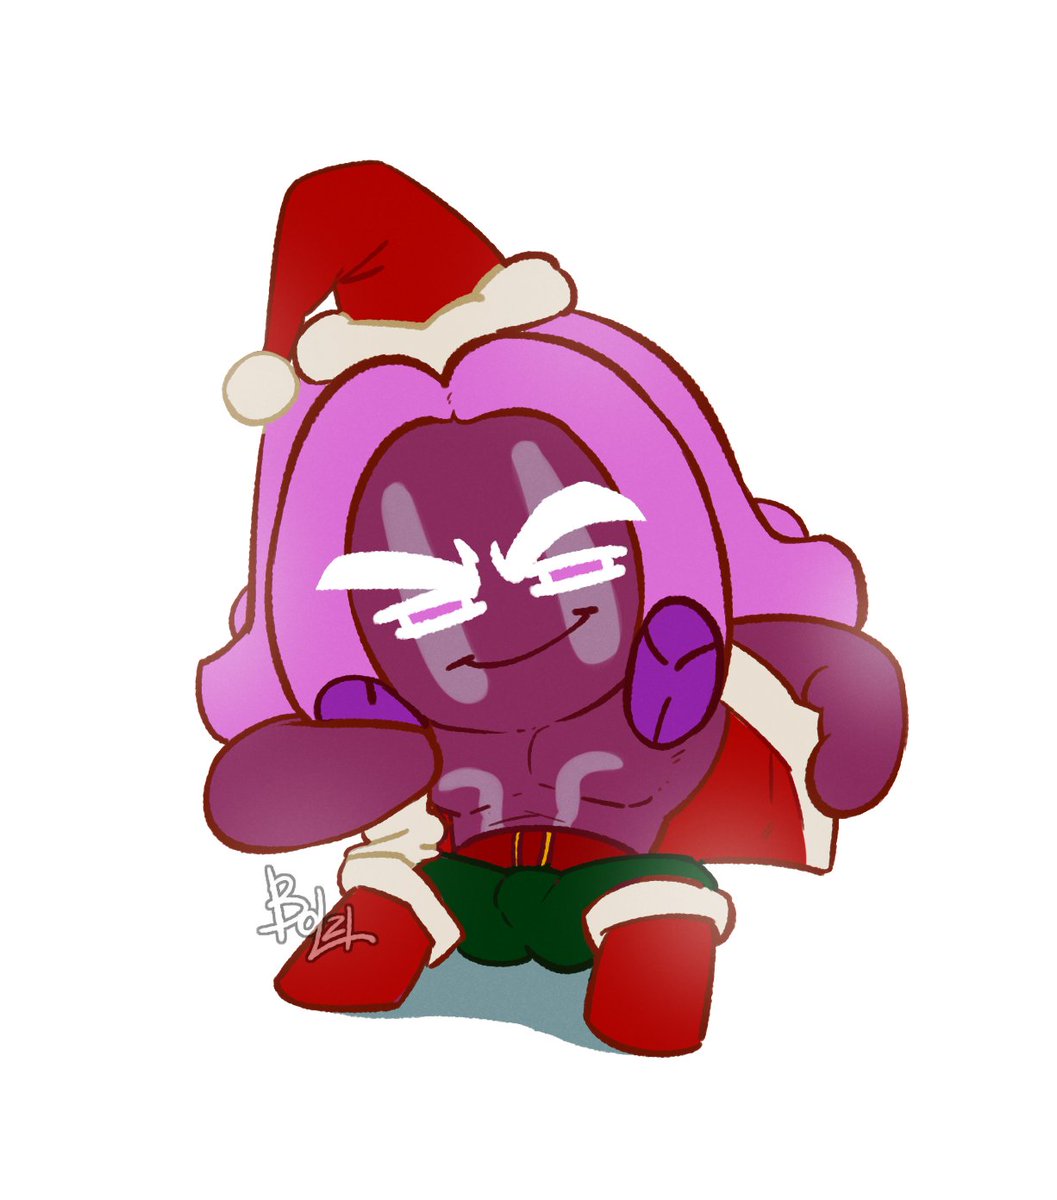 RT @BolTheEye: I want this santa costume for Yam in cookie run

#cookierun #purpleyamcookie https://t.co/VItKIxzlng